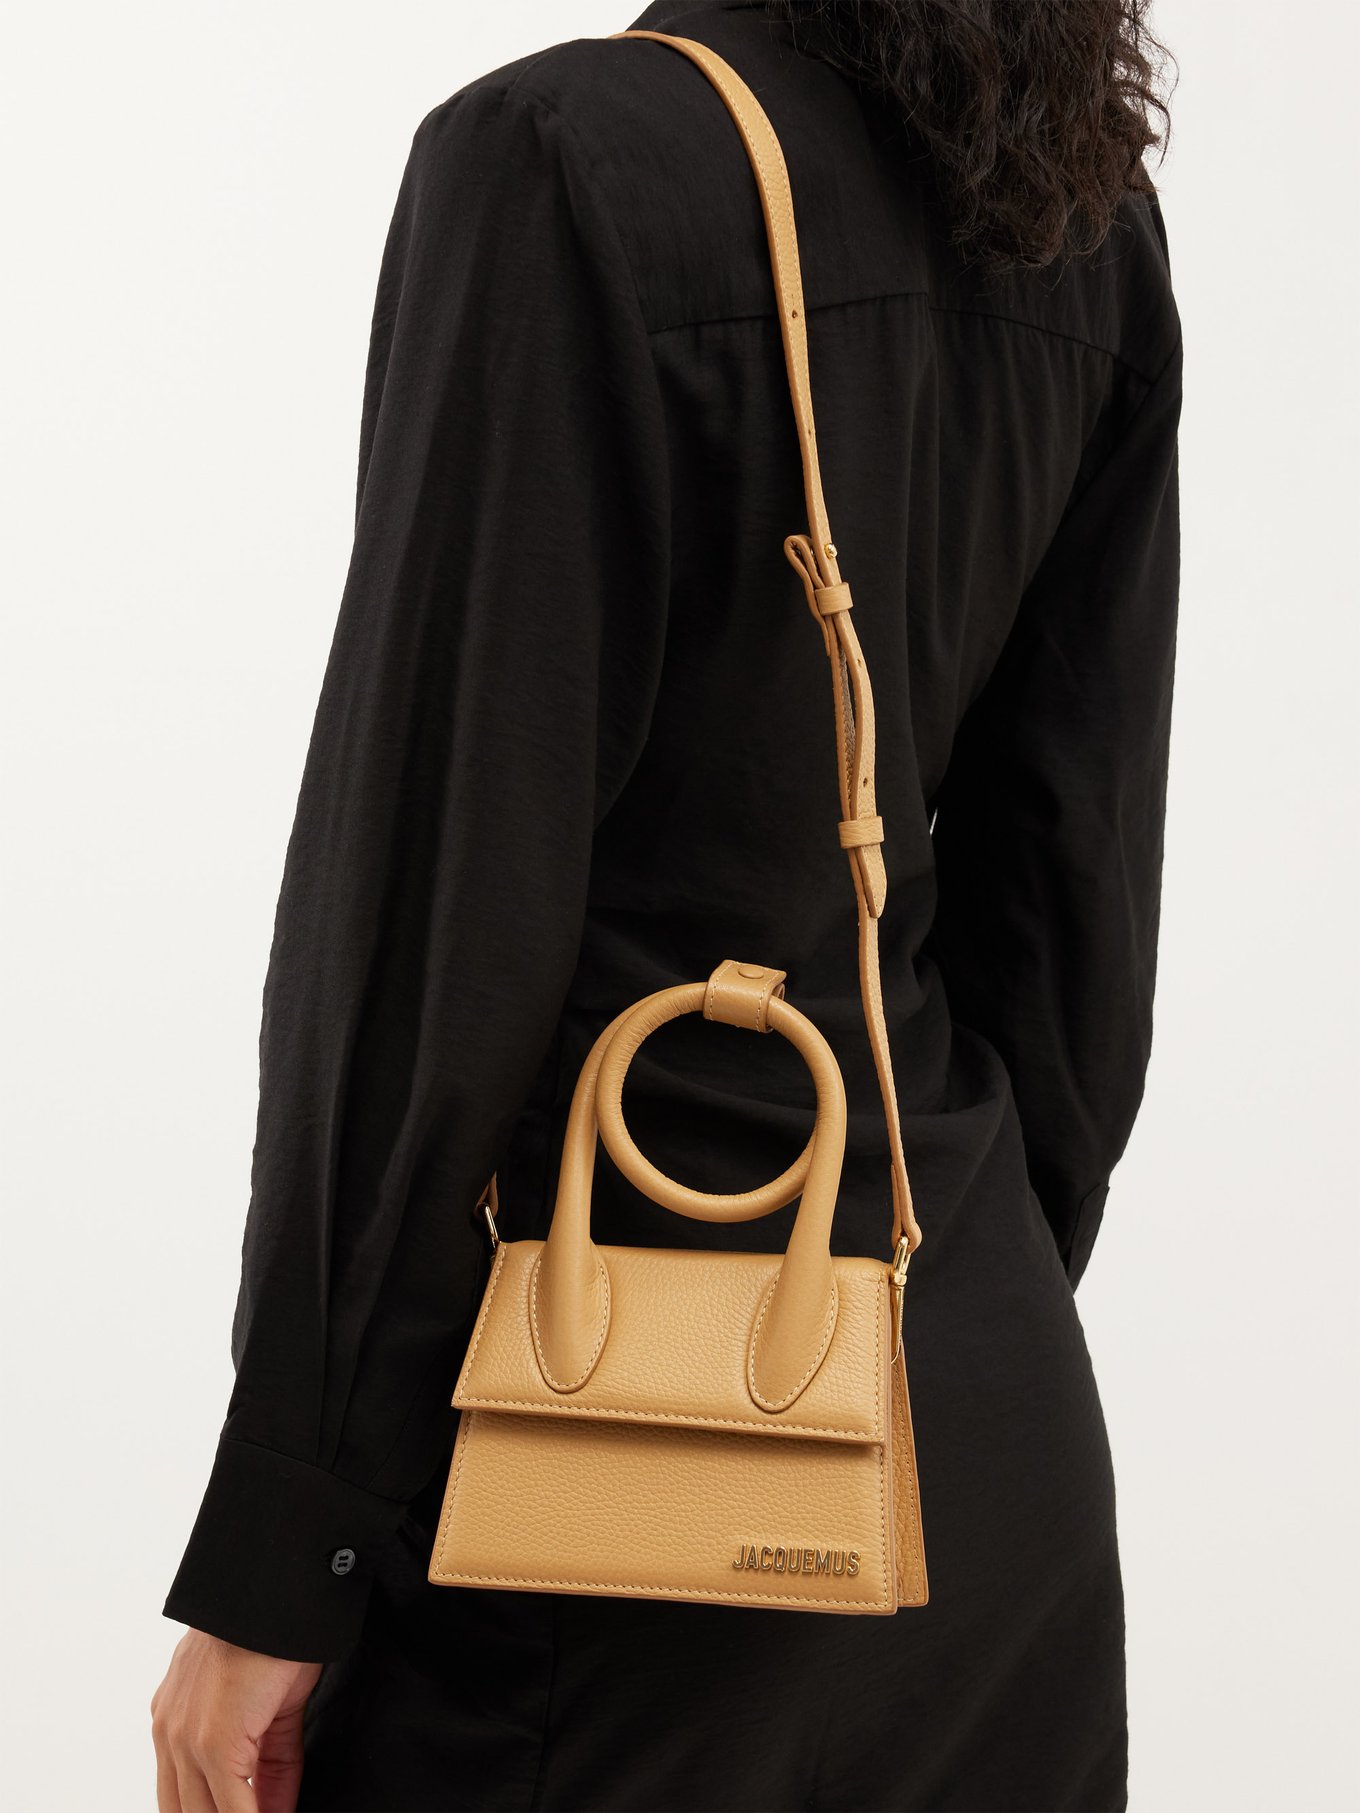 Jacquemus Le Chiquito Noeud leather tote bag